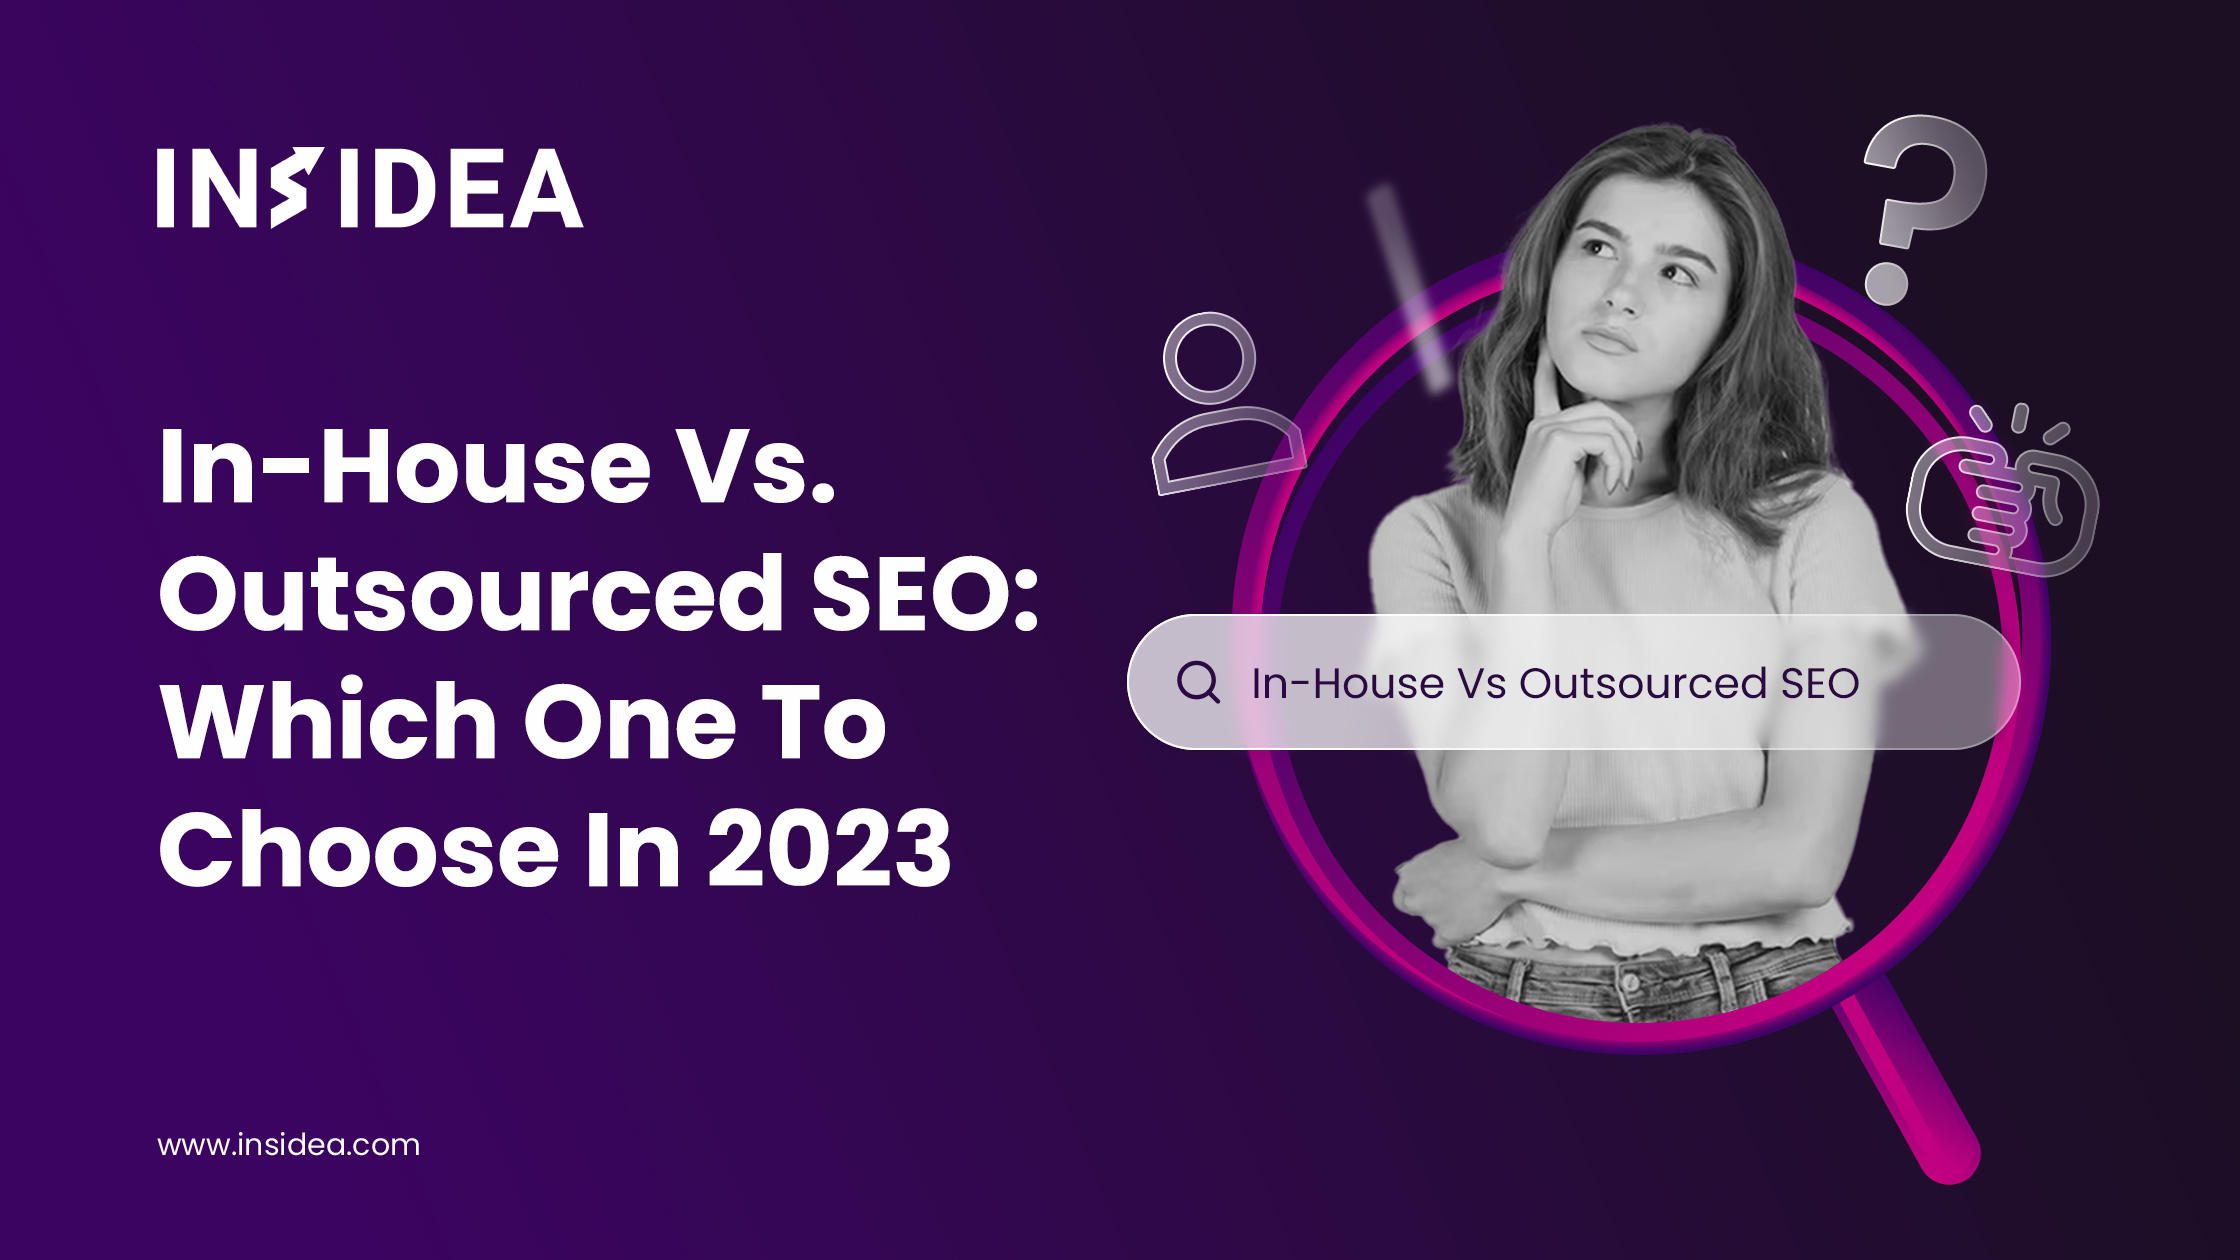 In-House vs Outsourced SEO: Which One To Choose In 2023